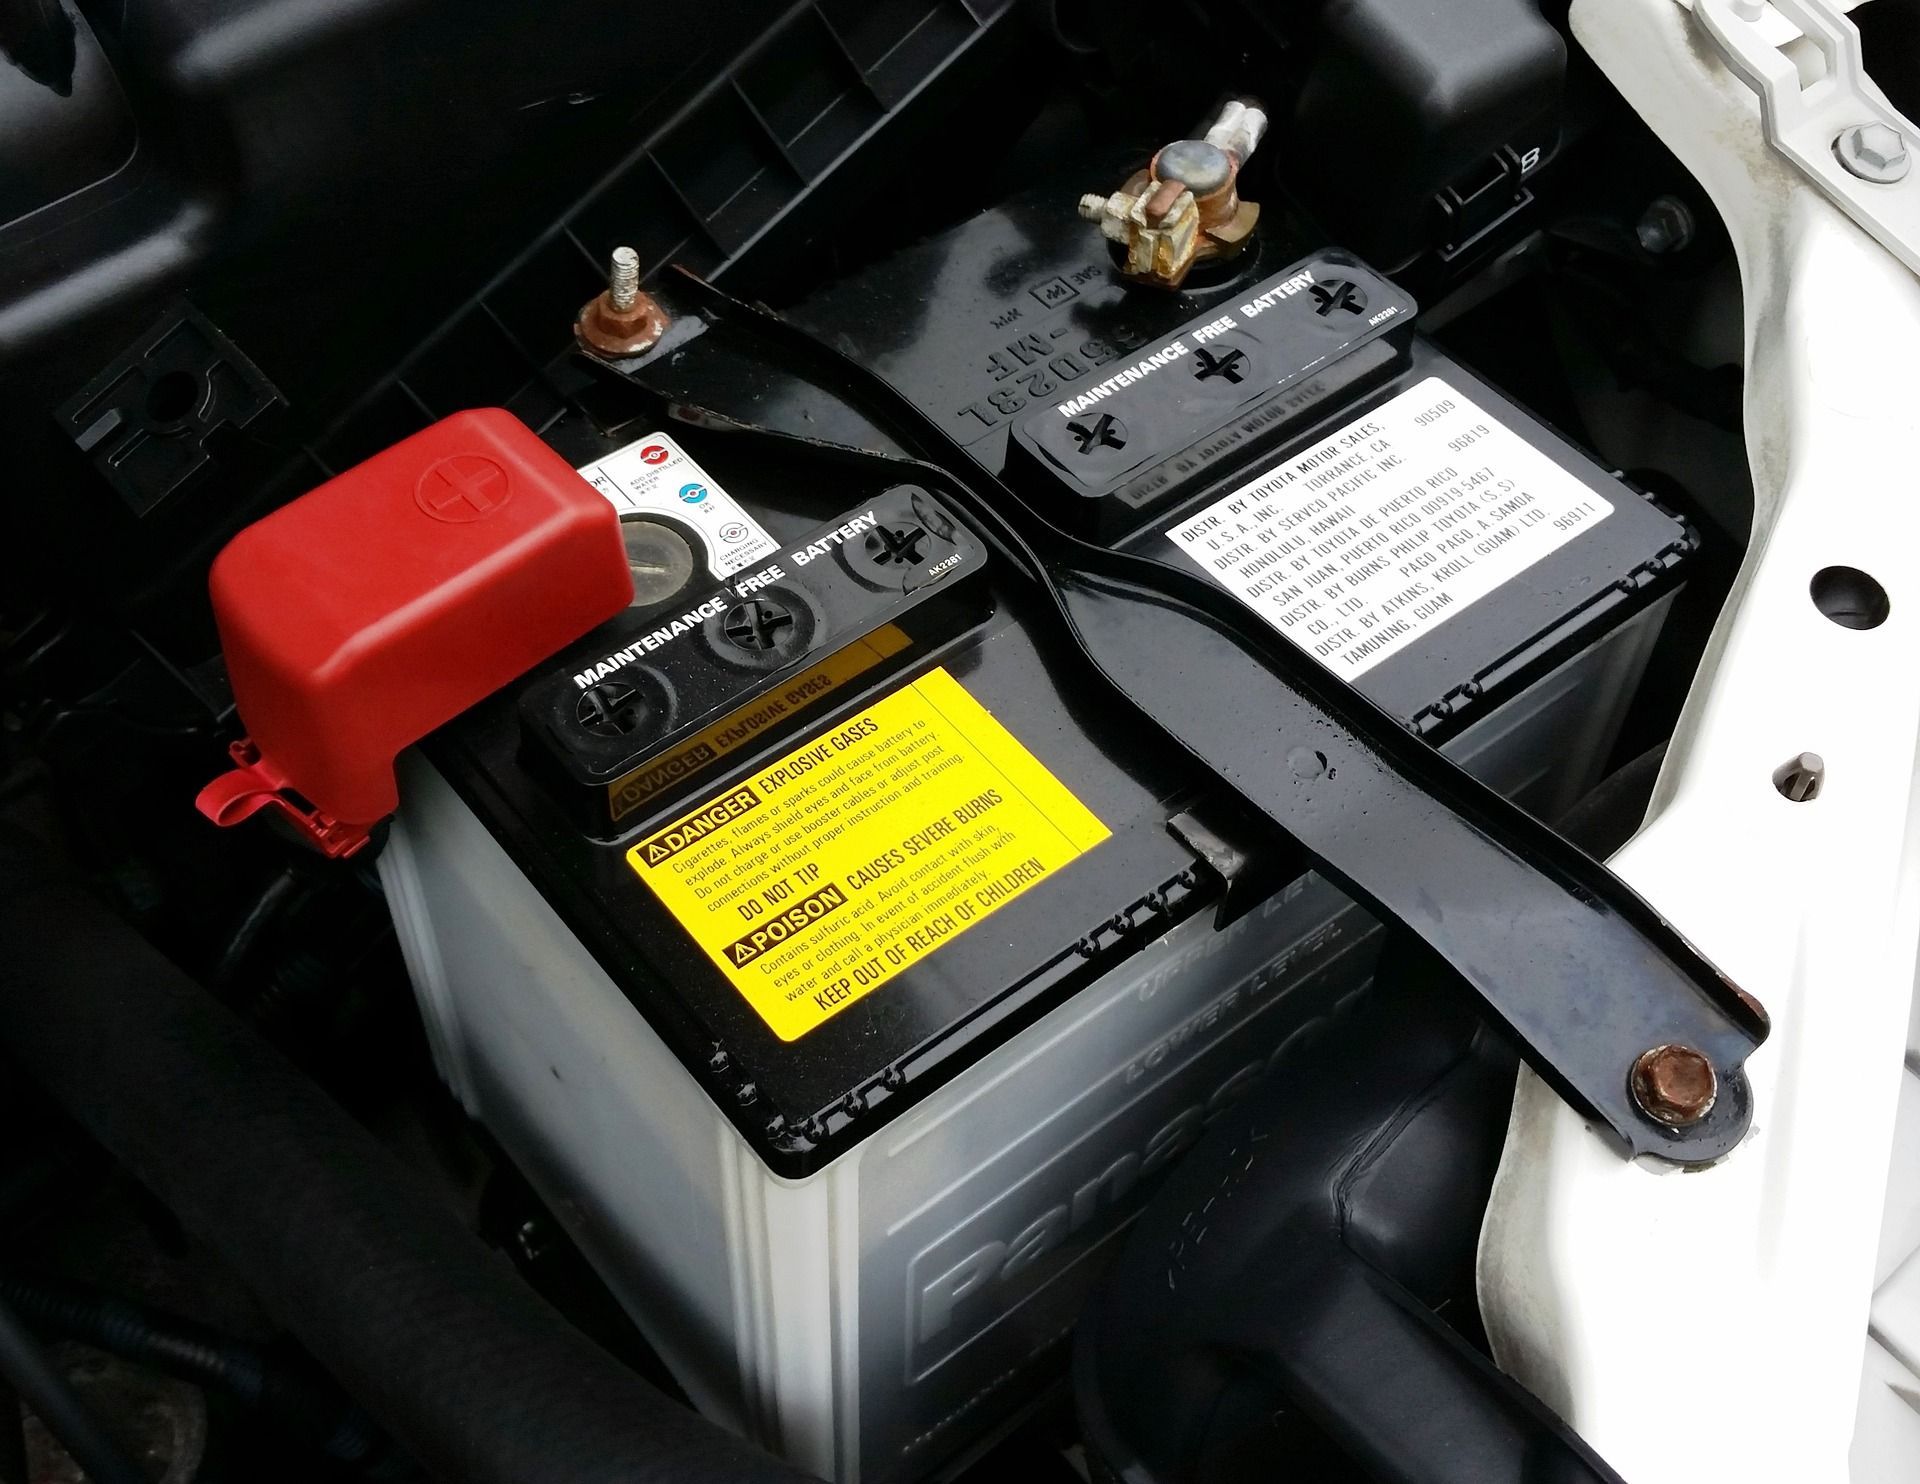 A close up of a car battery with a warning label on it